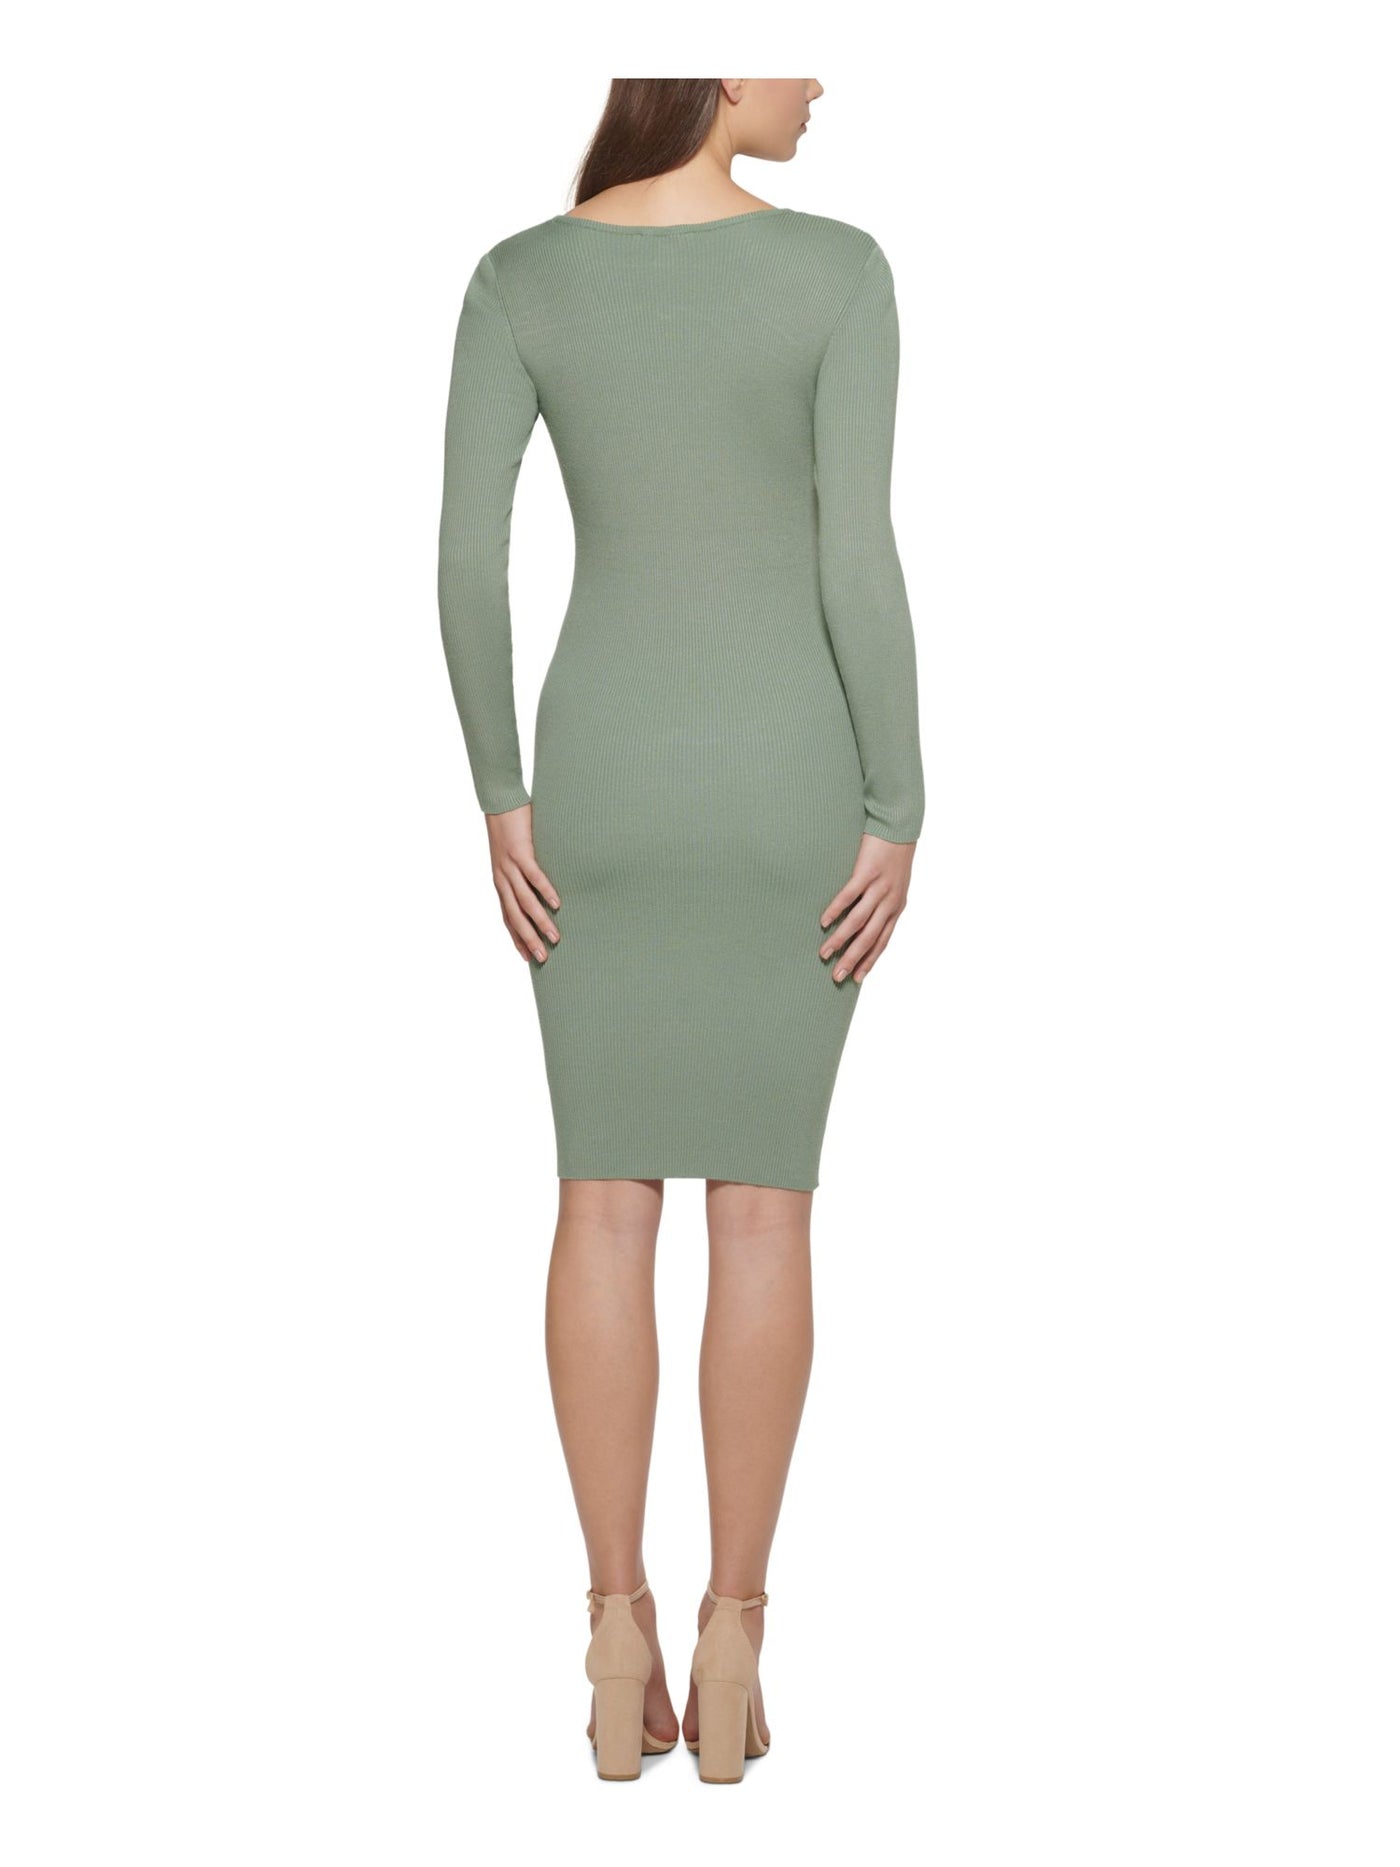 GUESS Womens Green Knit Ribbed Long Sleeve Square Neck Below The Knee Cocktail Sweater Dress XS